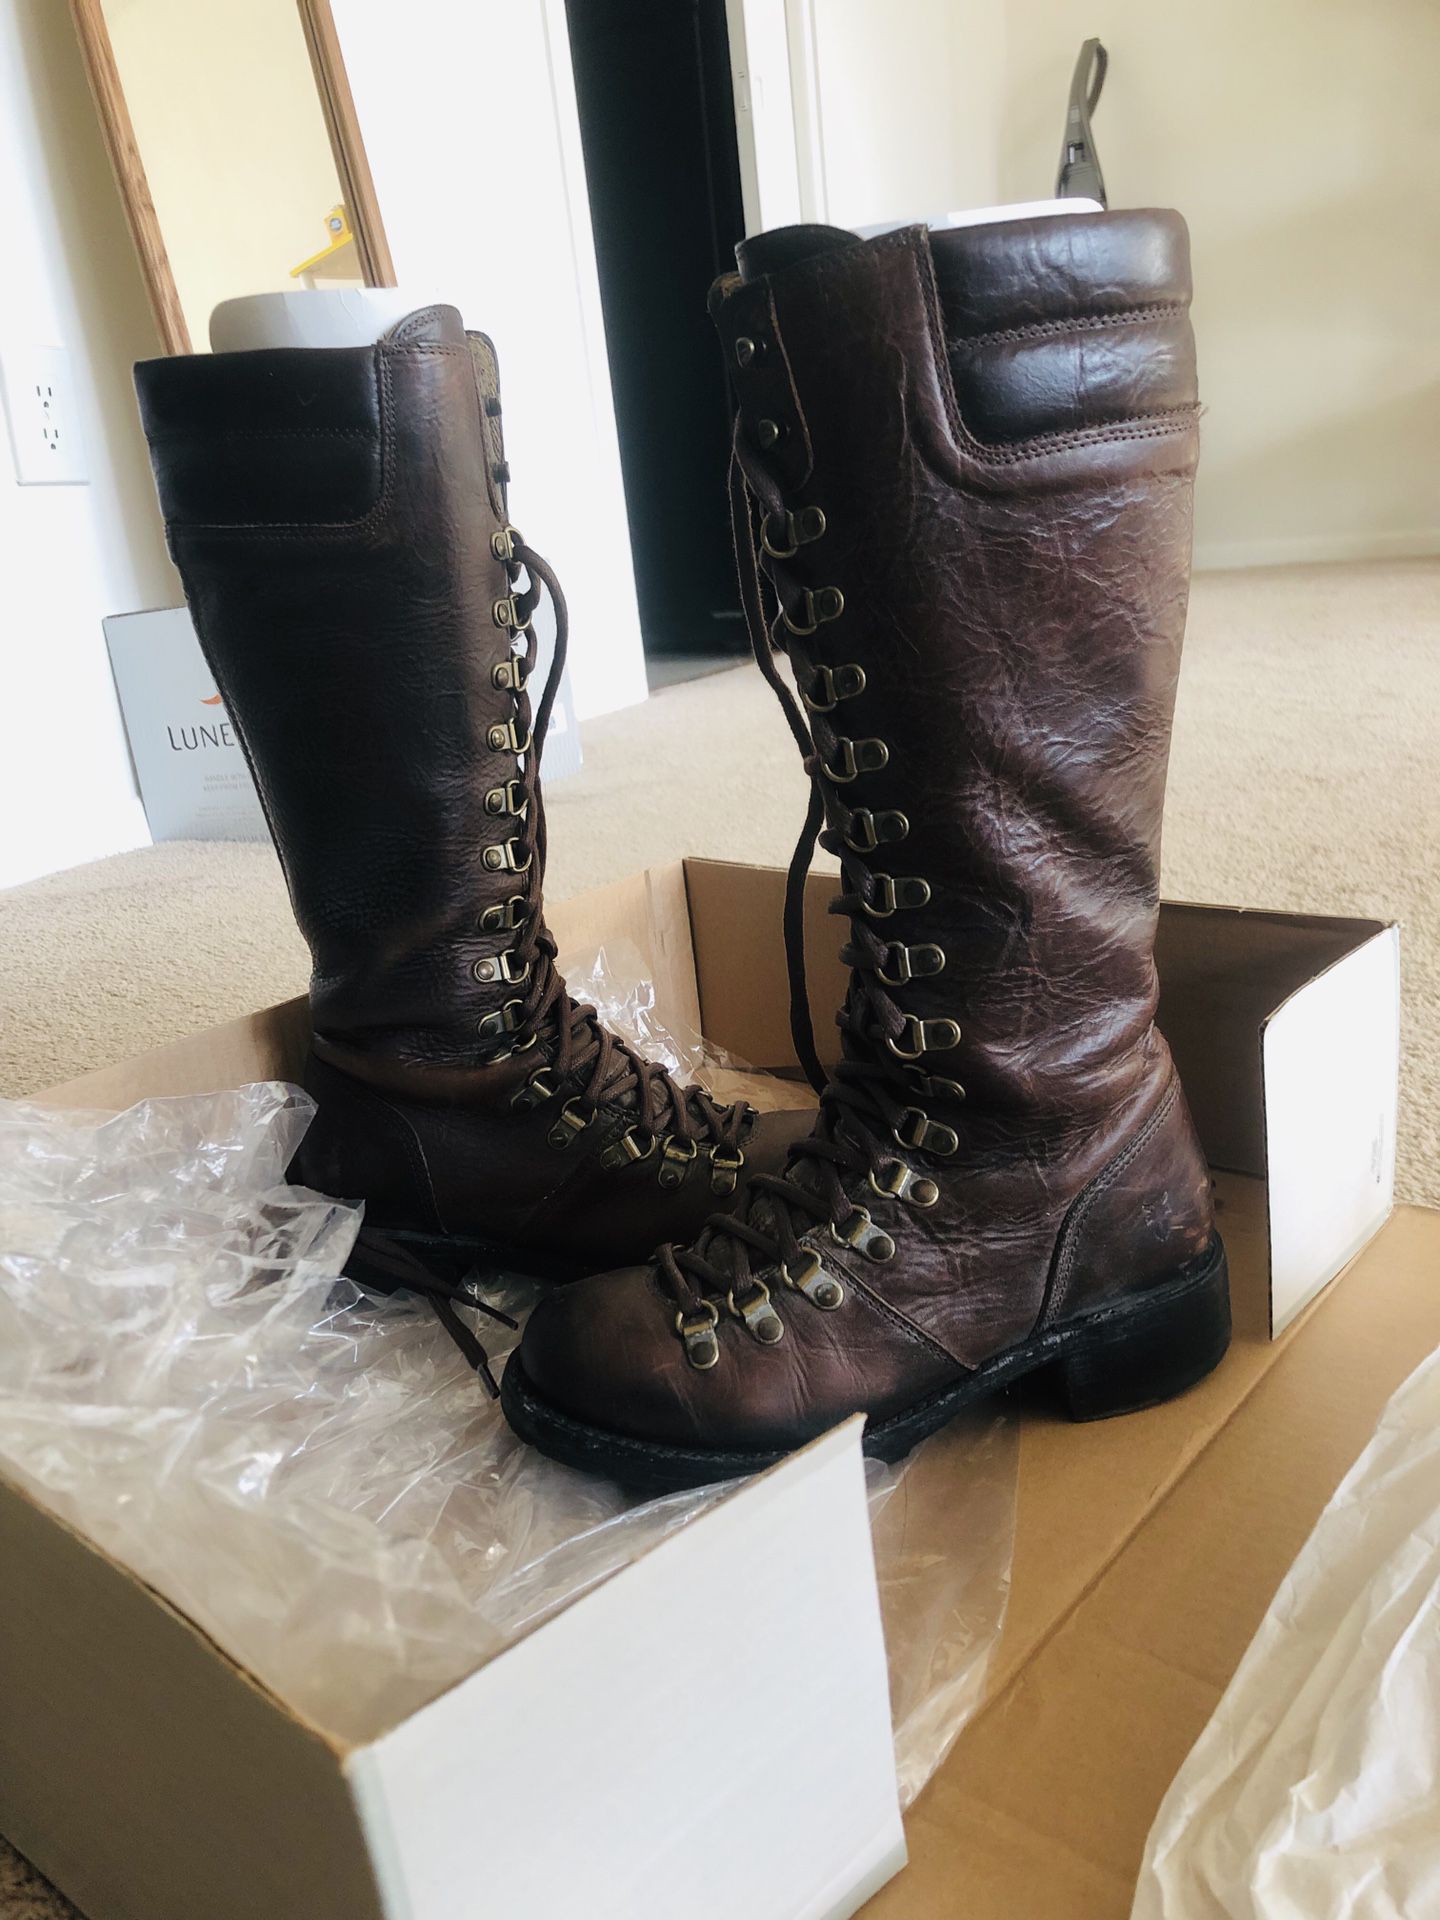 Frye tall lace zip up combat boot, size 6